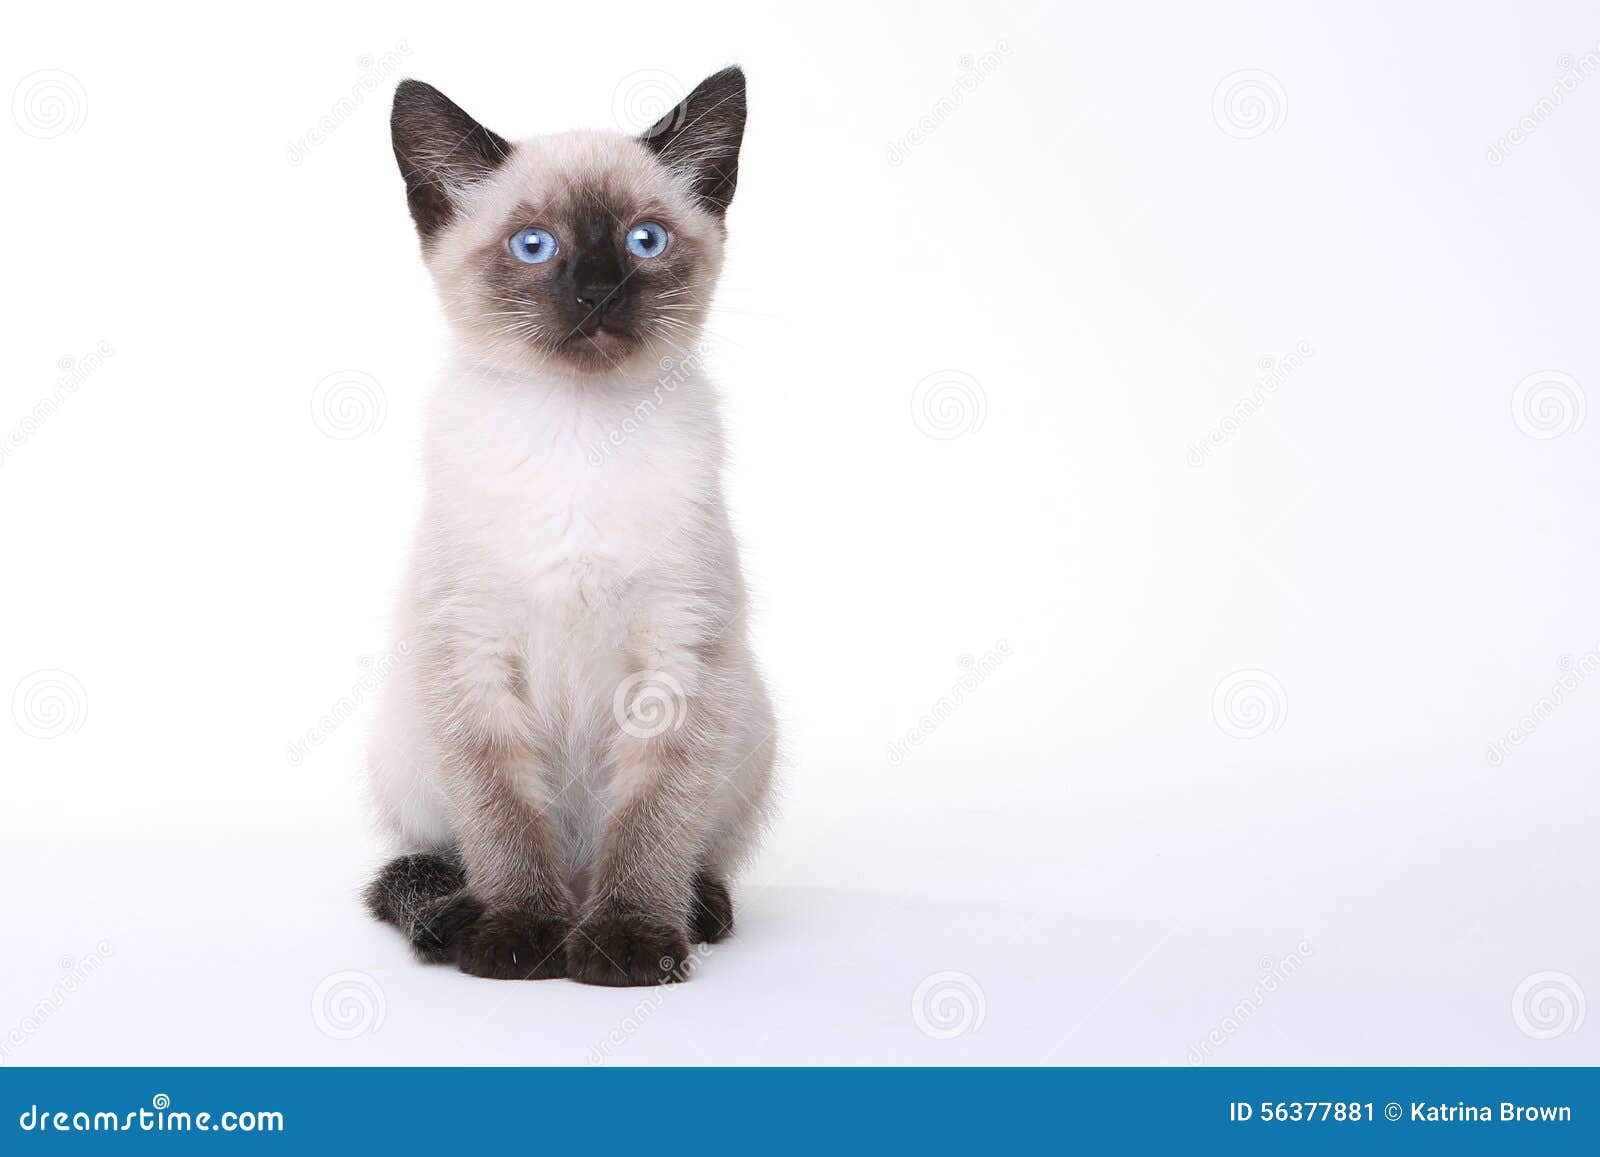 Siamese Kittens on a White Background Stock Image - Image of east ...